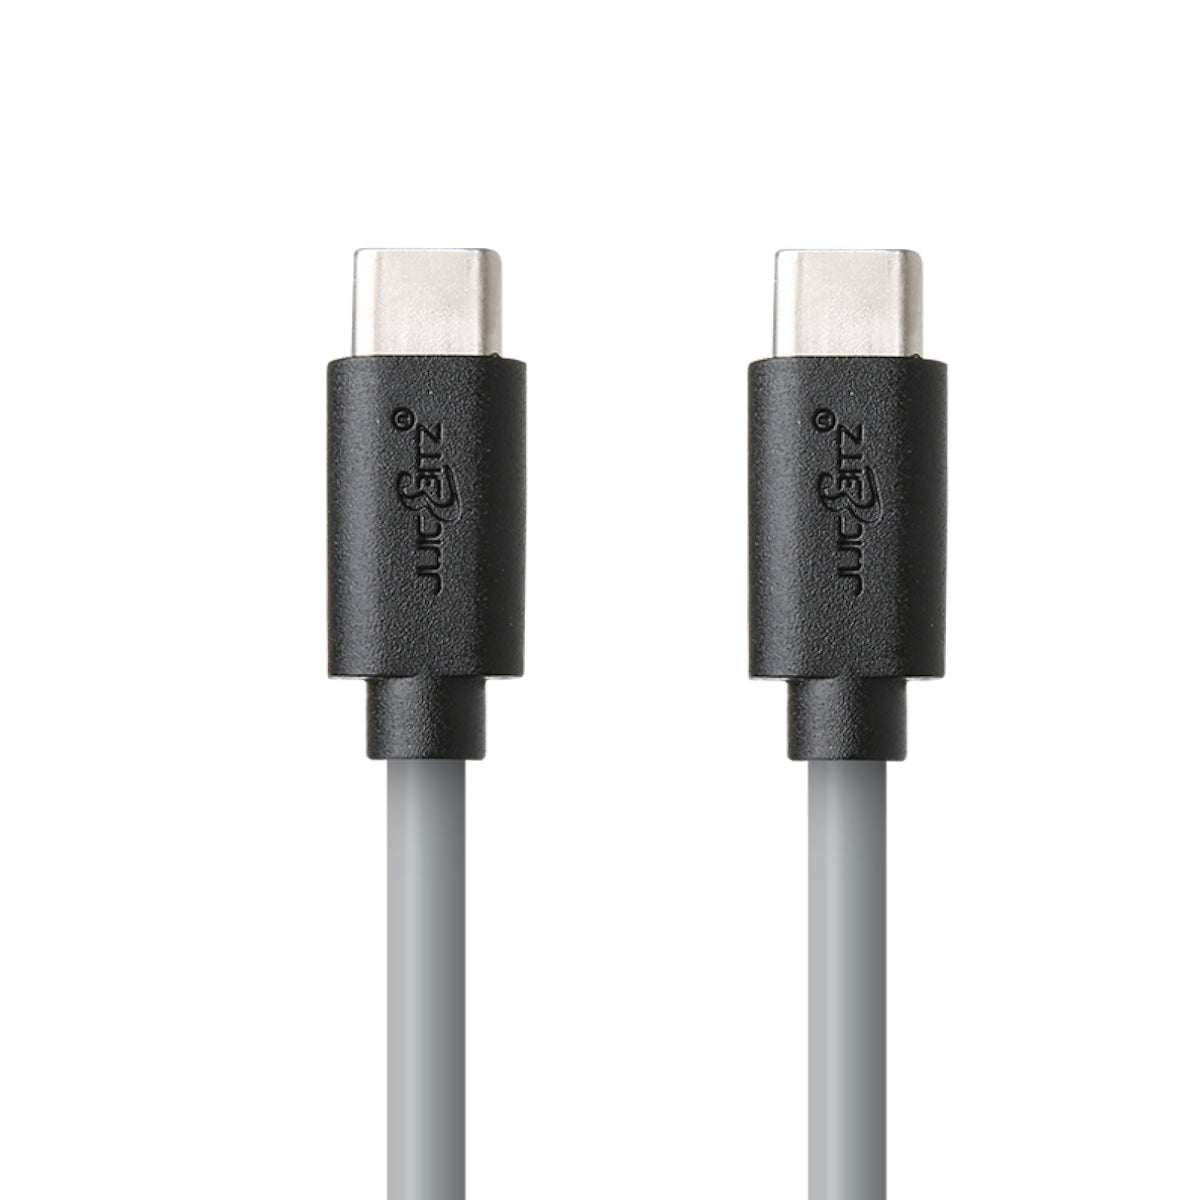 USB-C to USB-C 3A Charger Cable USB 2.0 Data Transfer Lead - Grey